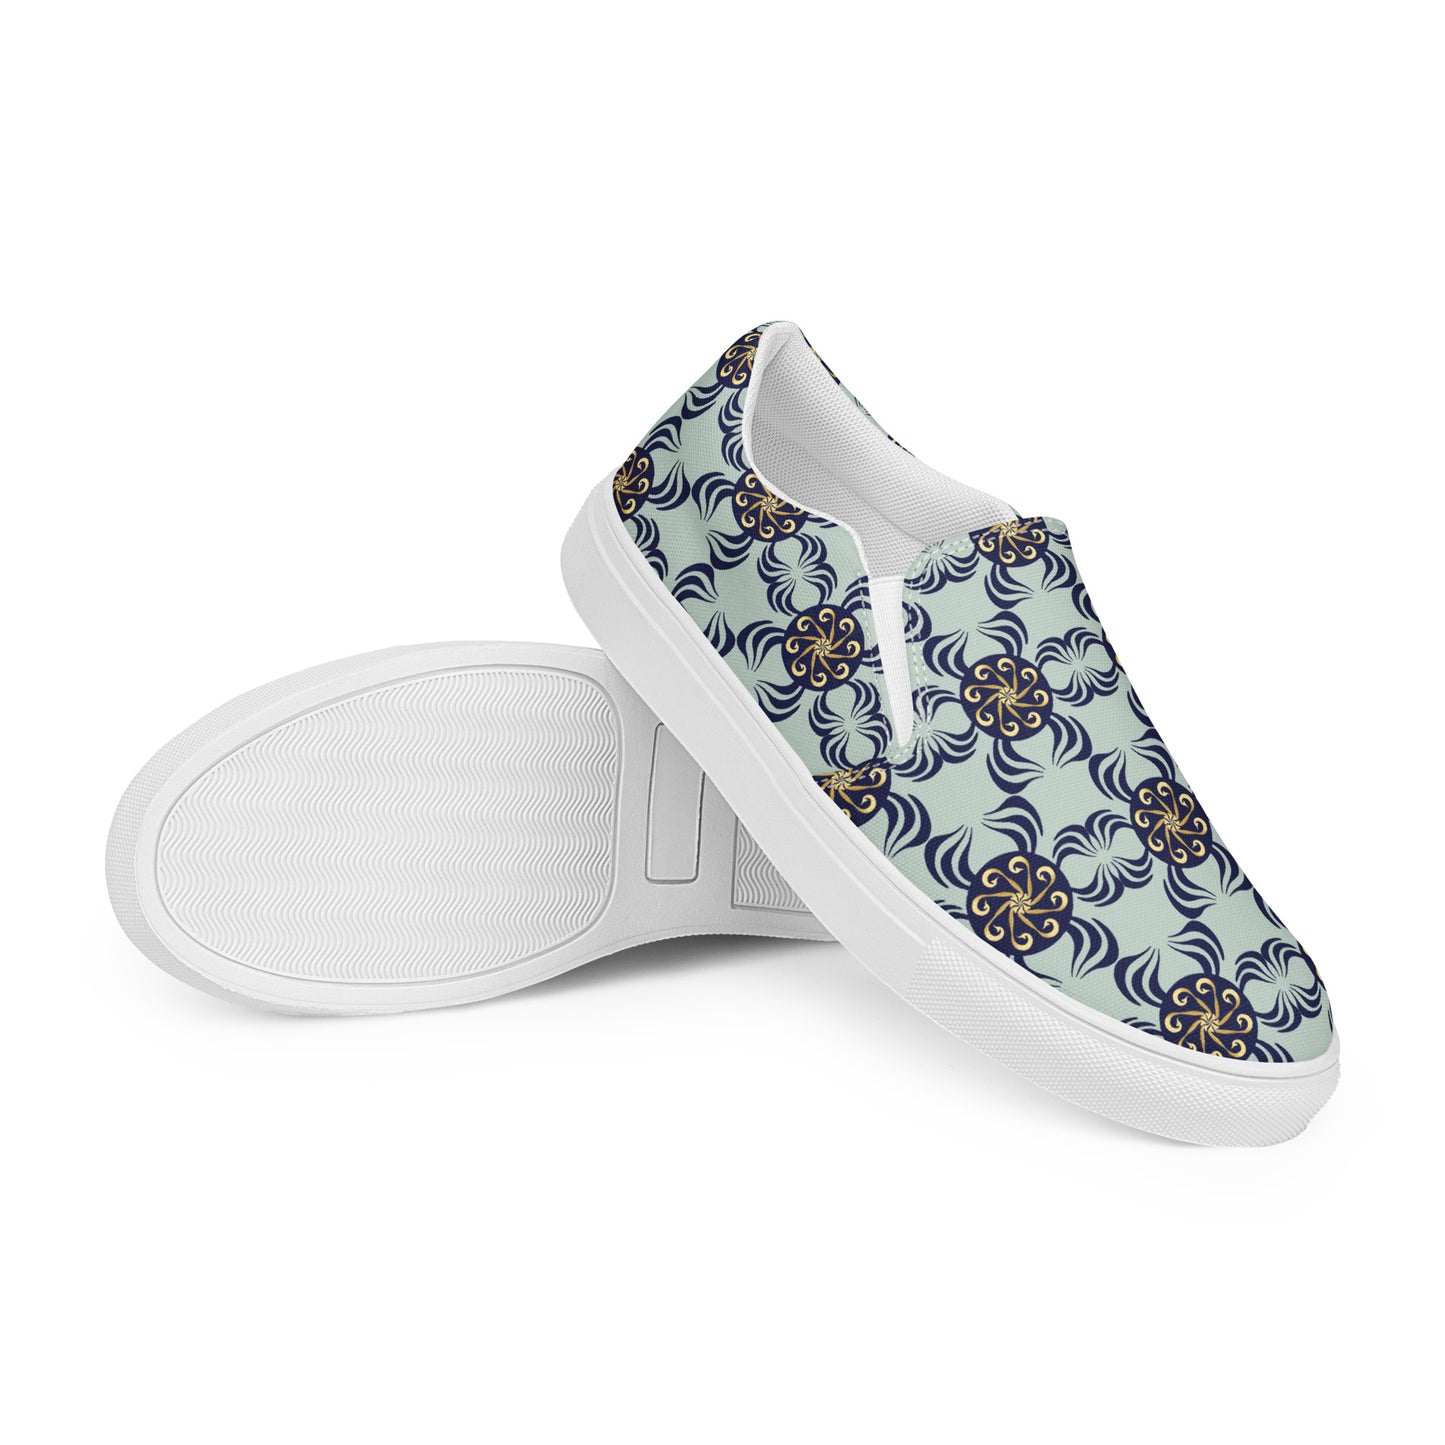 Women’s slip-on canvas shoes Kukloso Abstractical No 42 - Free Shipping